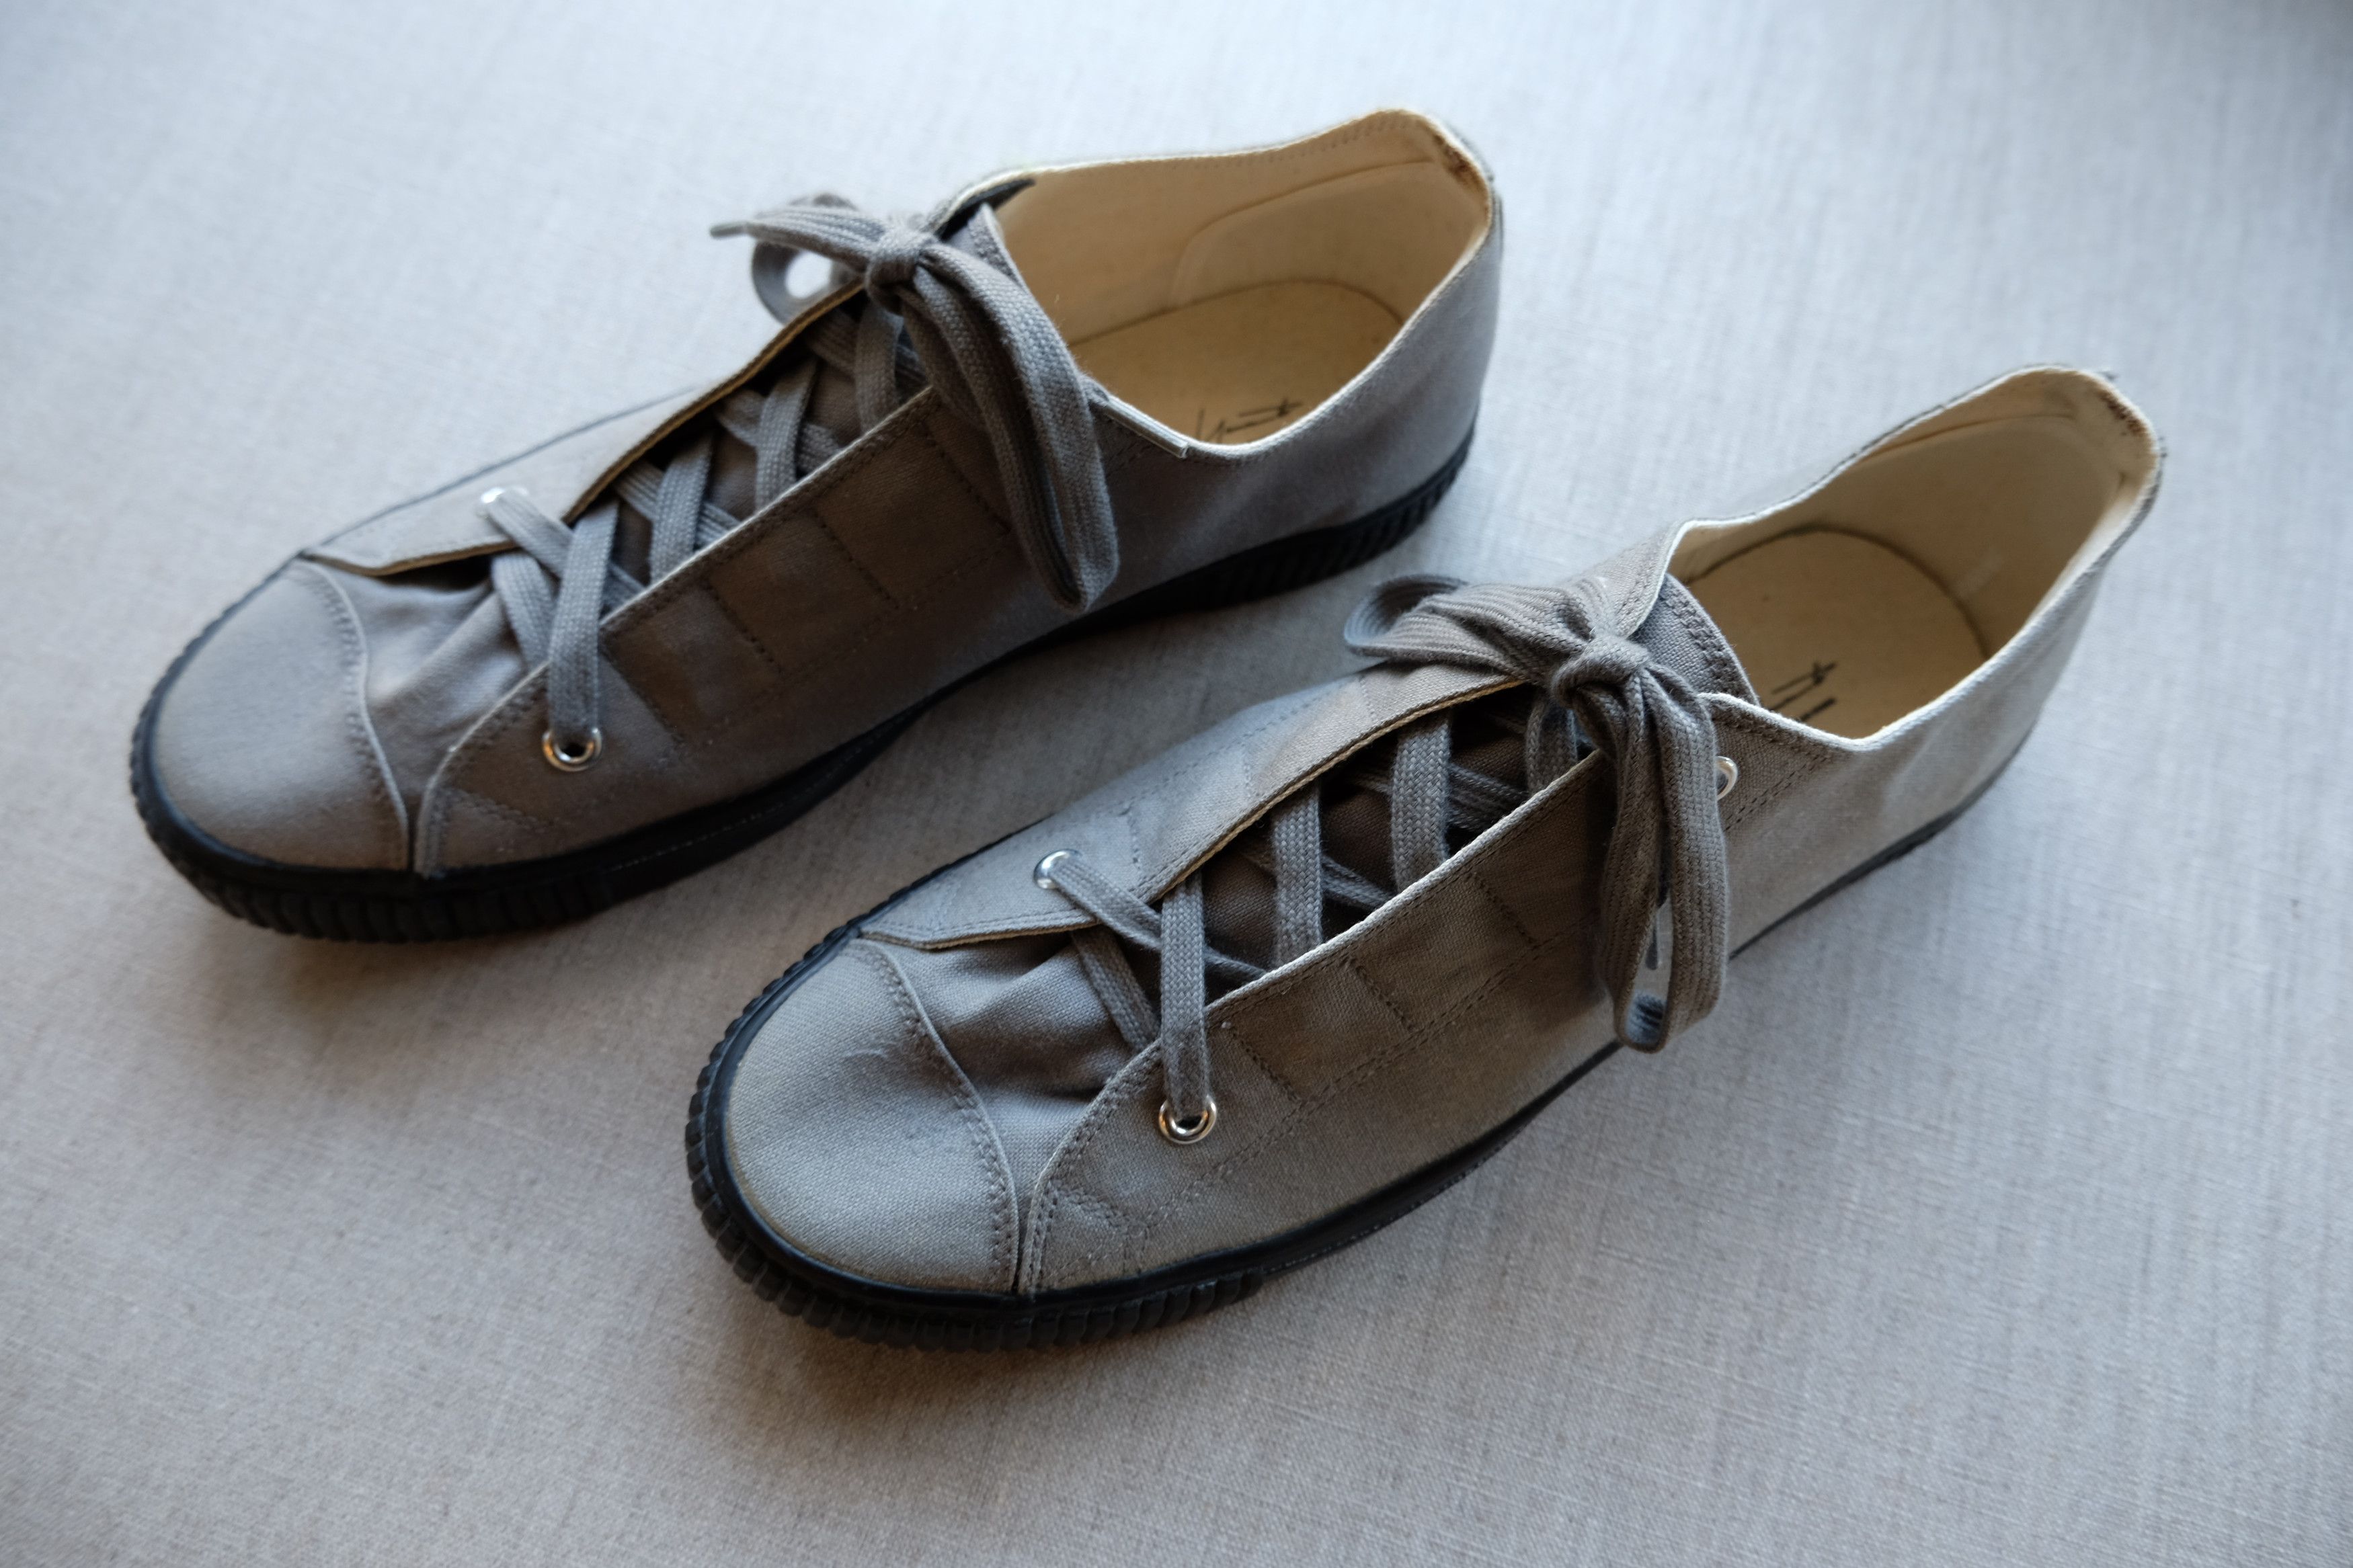 SS16-Runway Canvas Shoes with Hidden Eyelets - 8